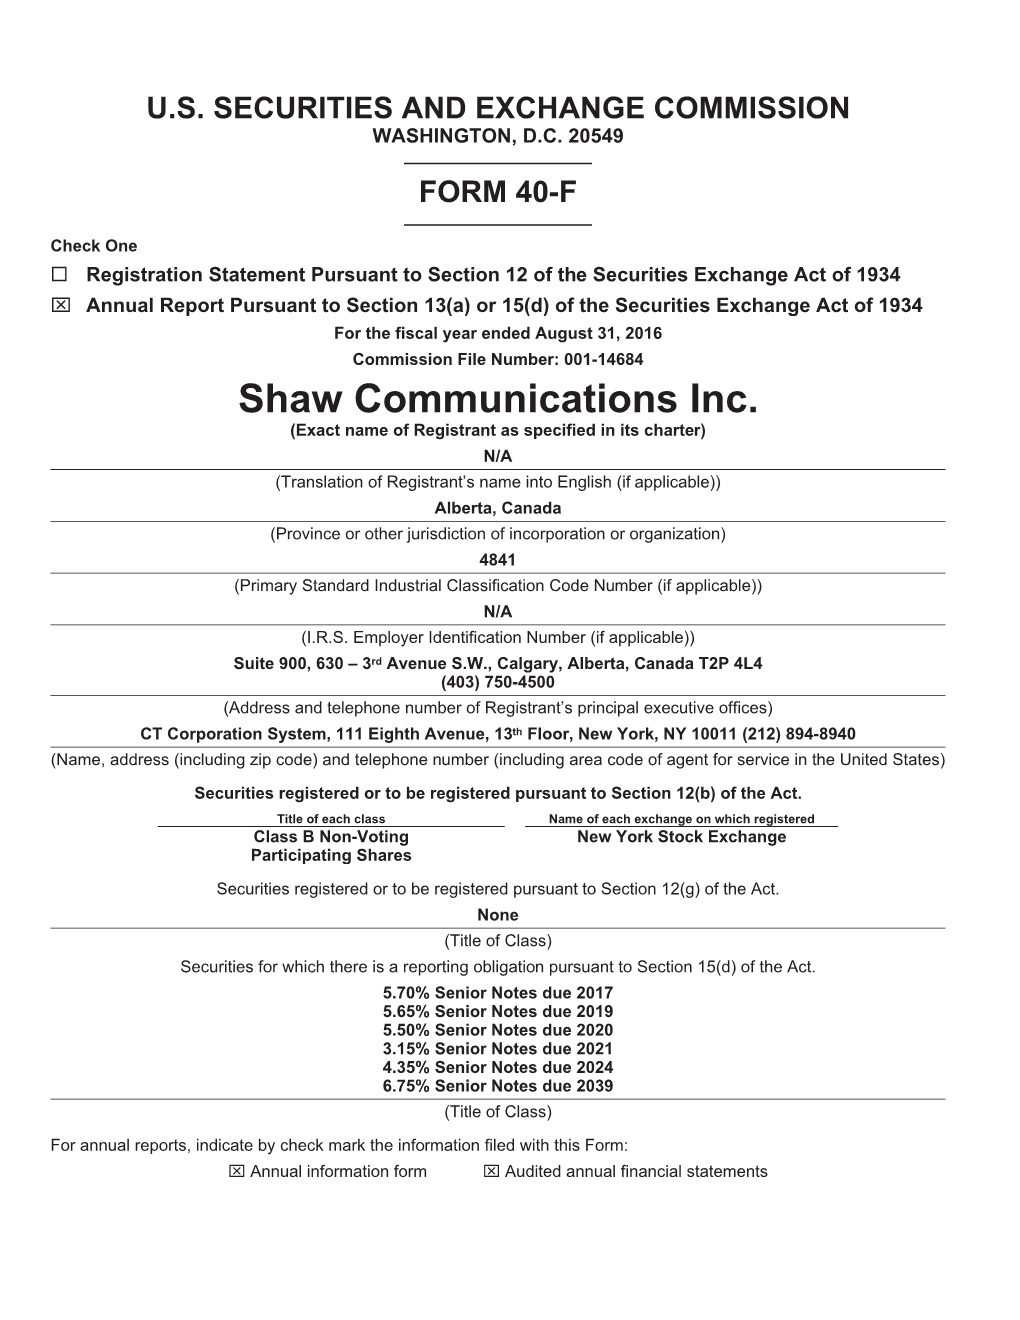 Shaw Communications Inc. (Exact Name of Registrant As Specified in Its Charter)